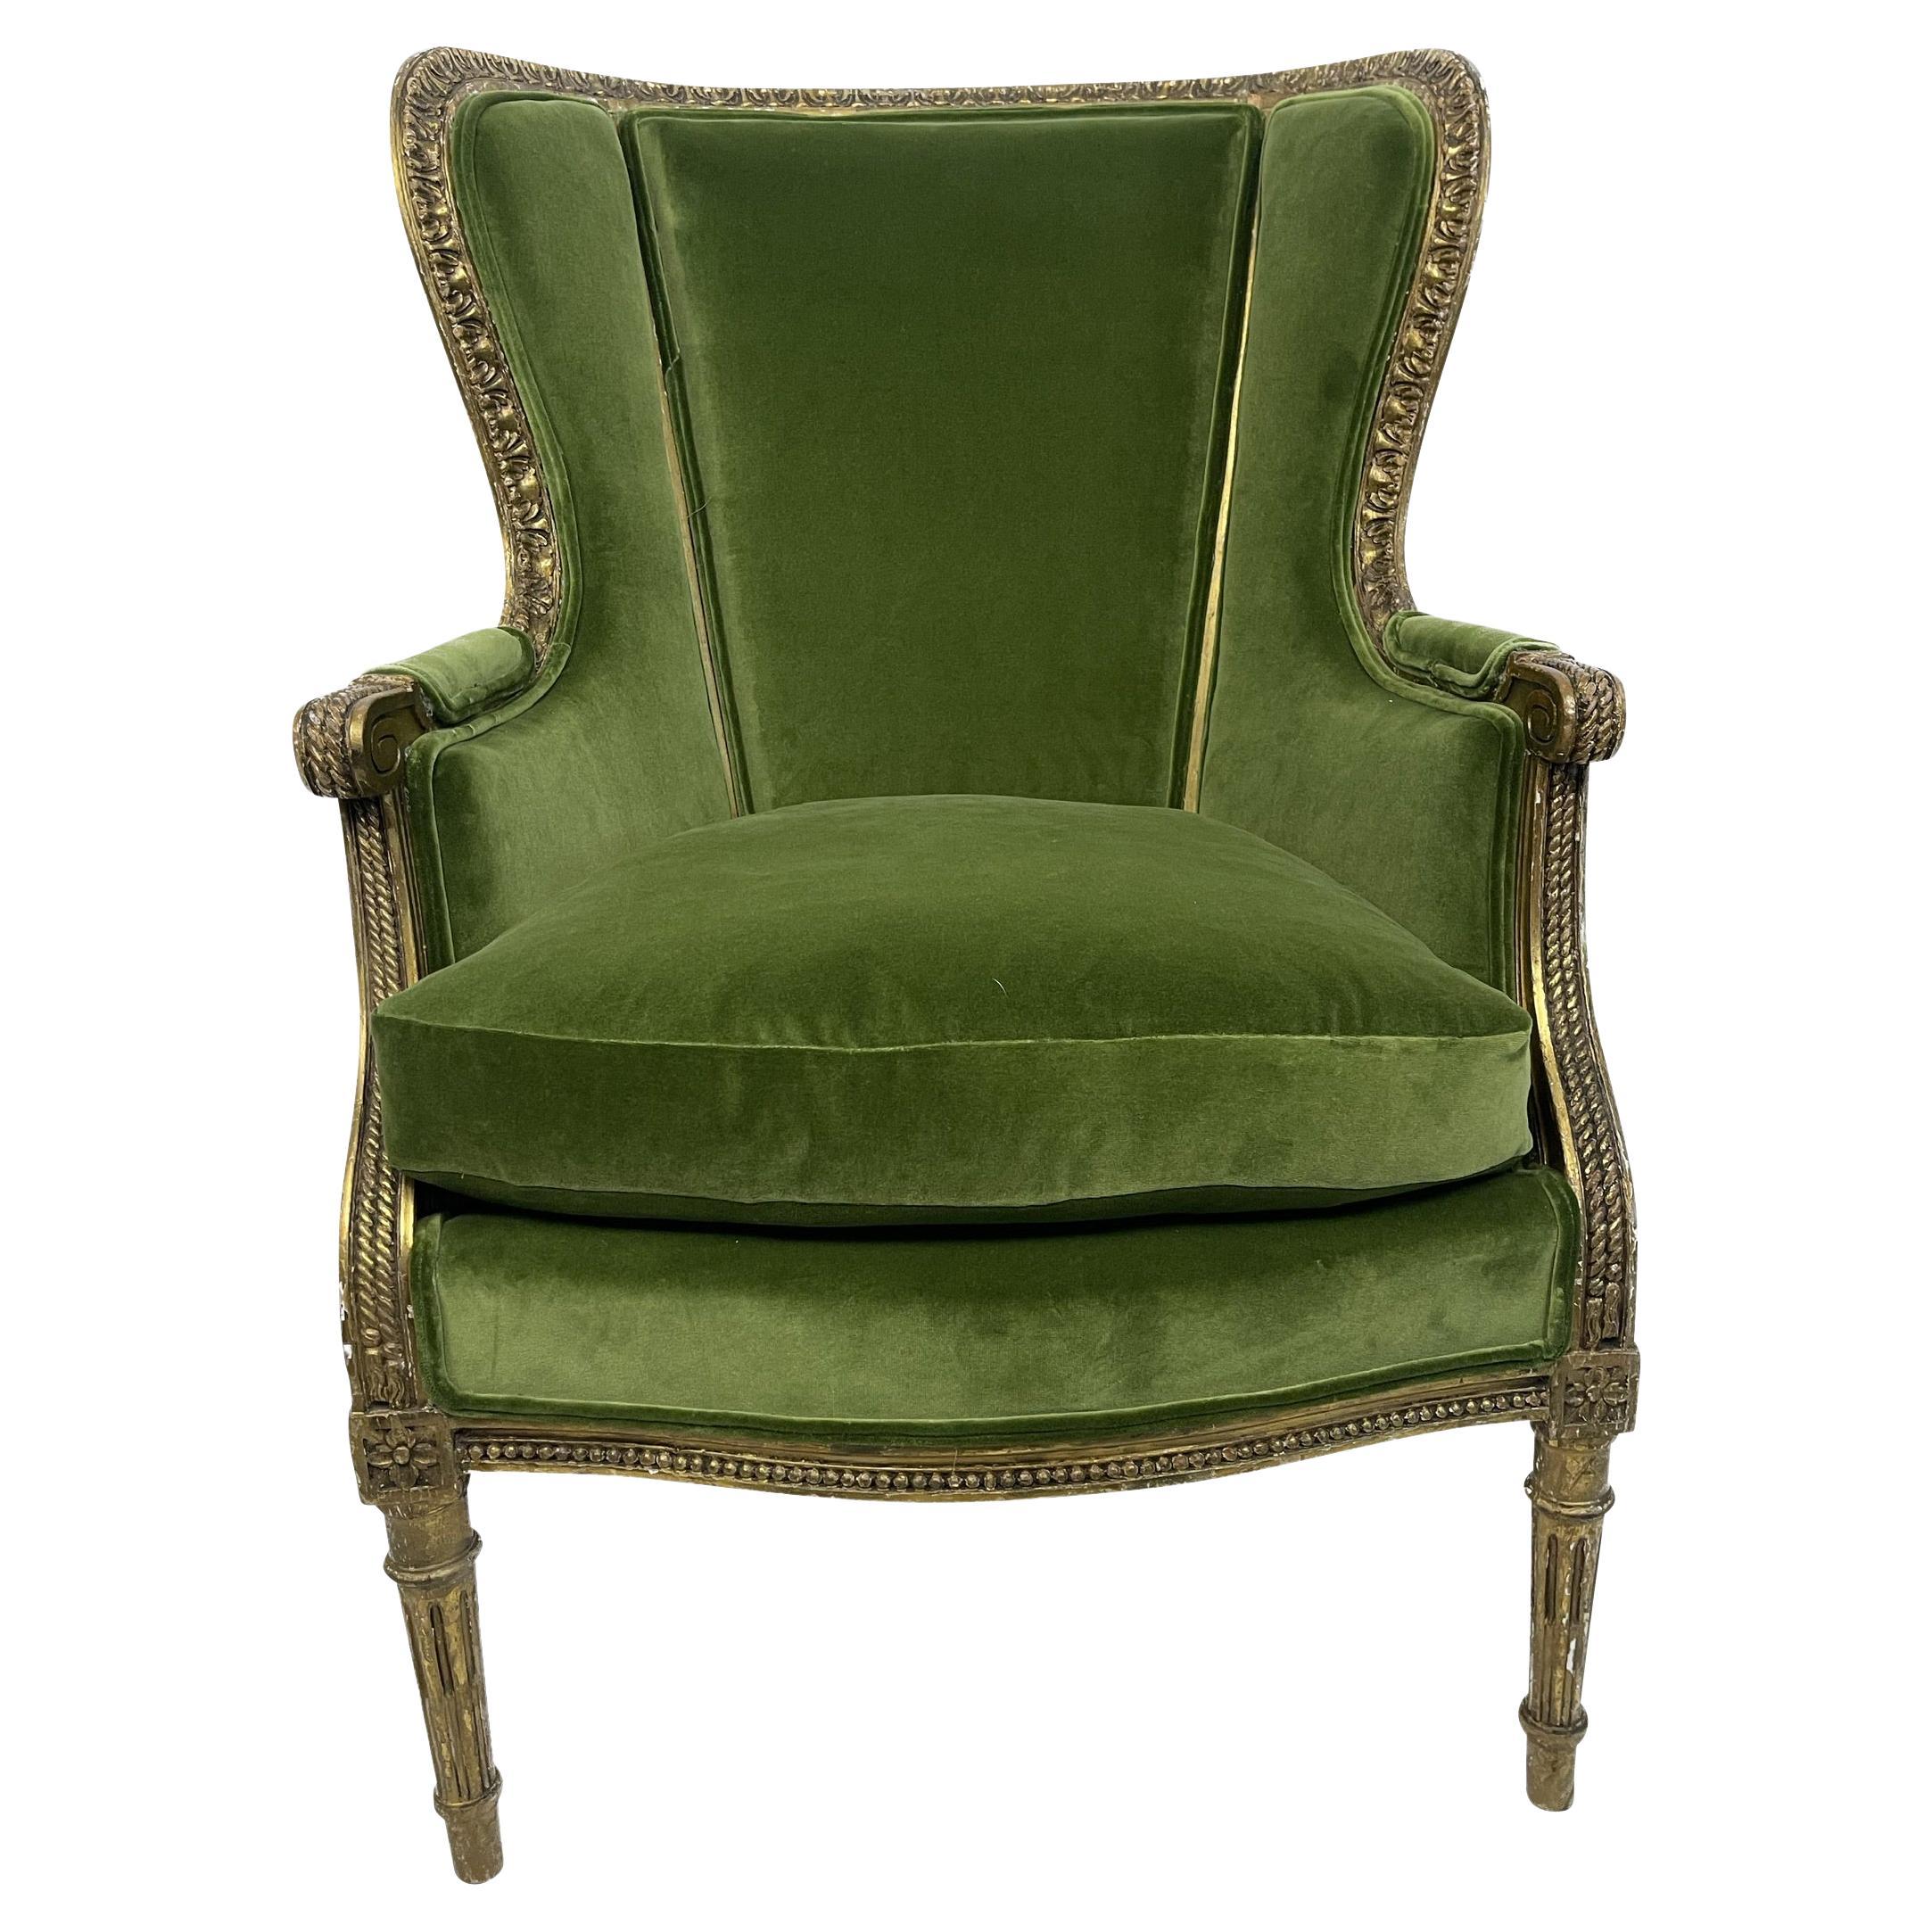 Louis XVI Style Giltwood Carved Bergere/ Arnchair with Green Velvet